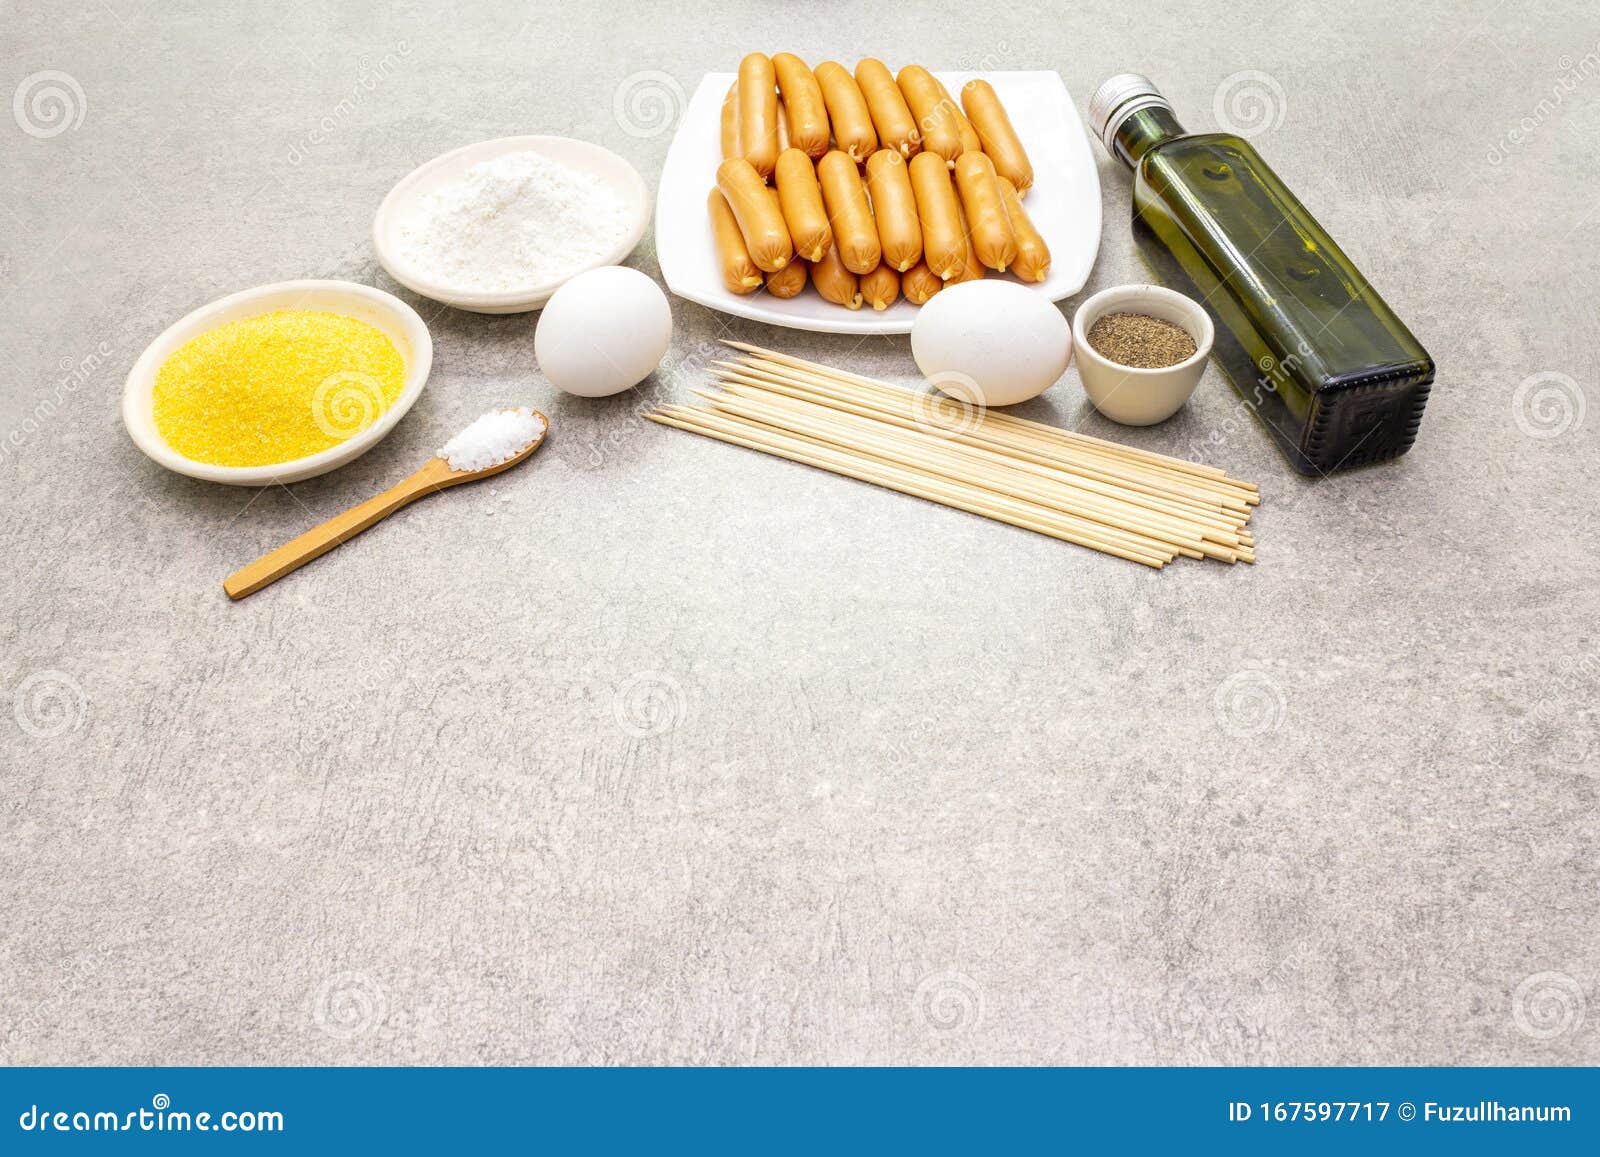 Corn Dogs Ingredients. Traditional American Street Food Stock Image